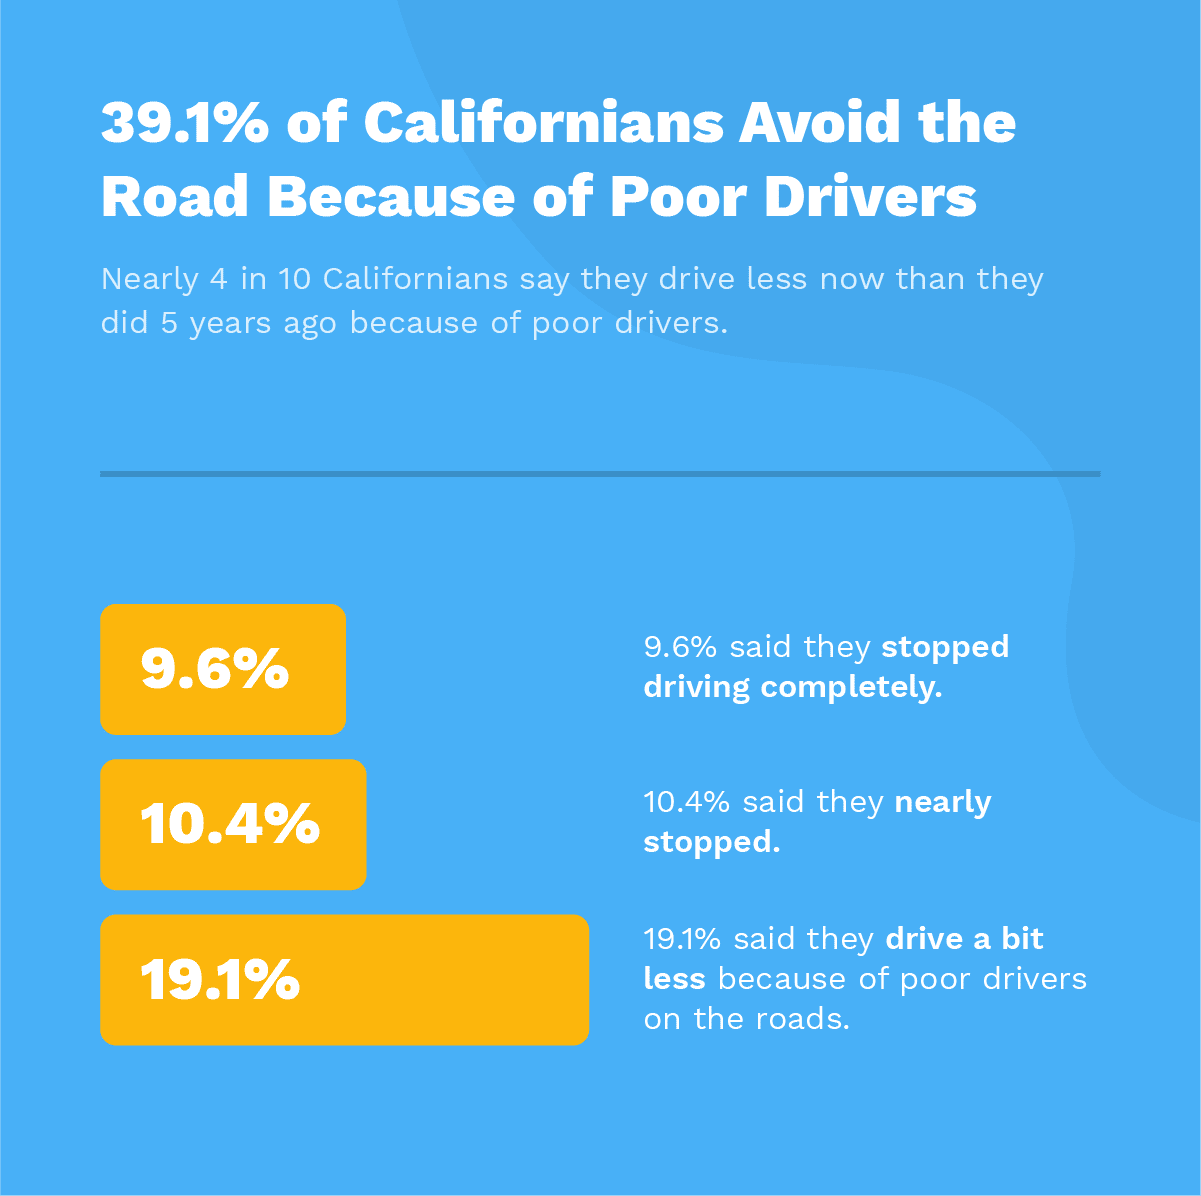 39.1% of Californians Avoid the Road Because of Poor Drivers